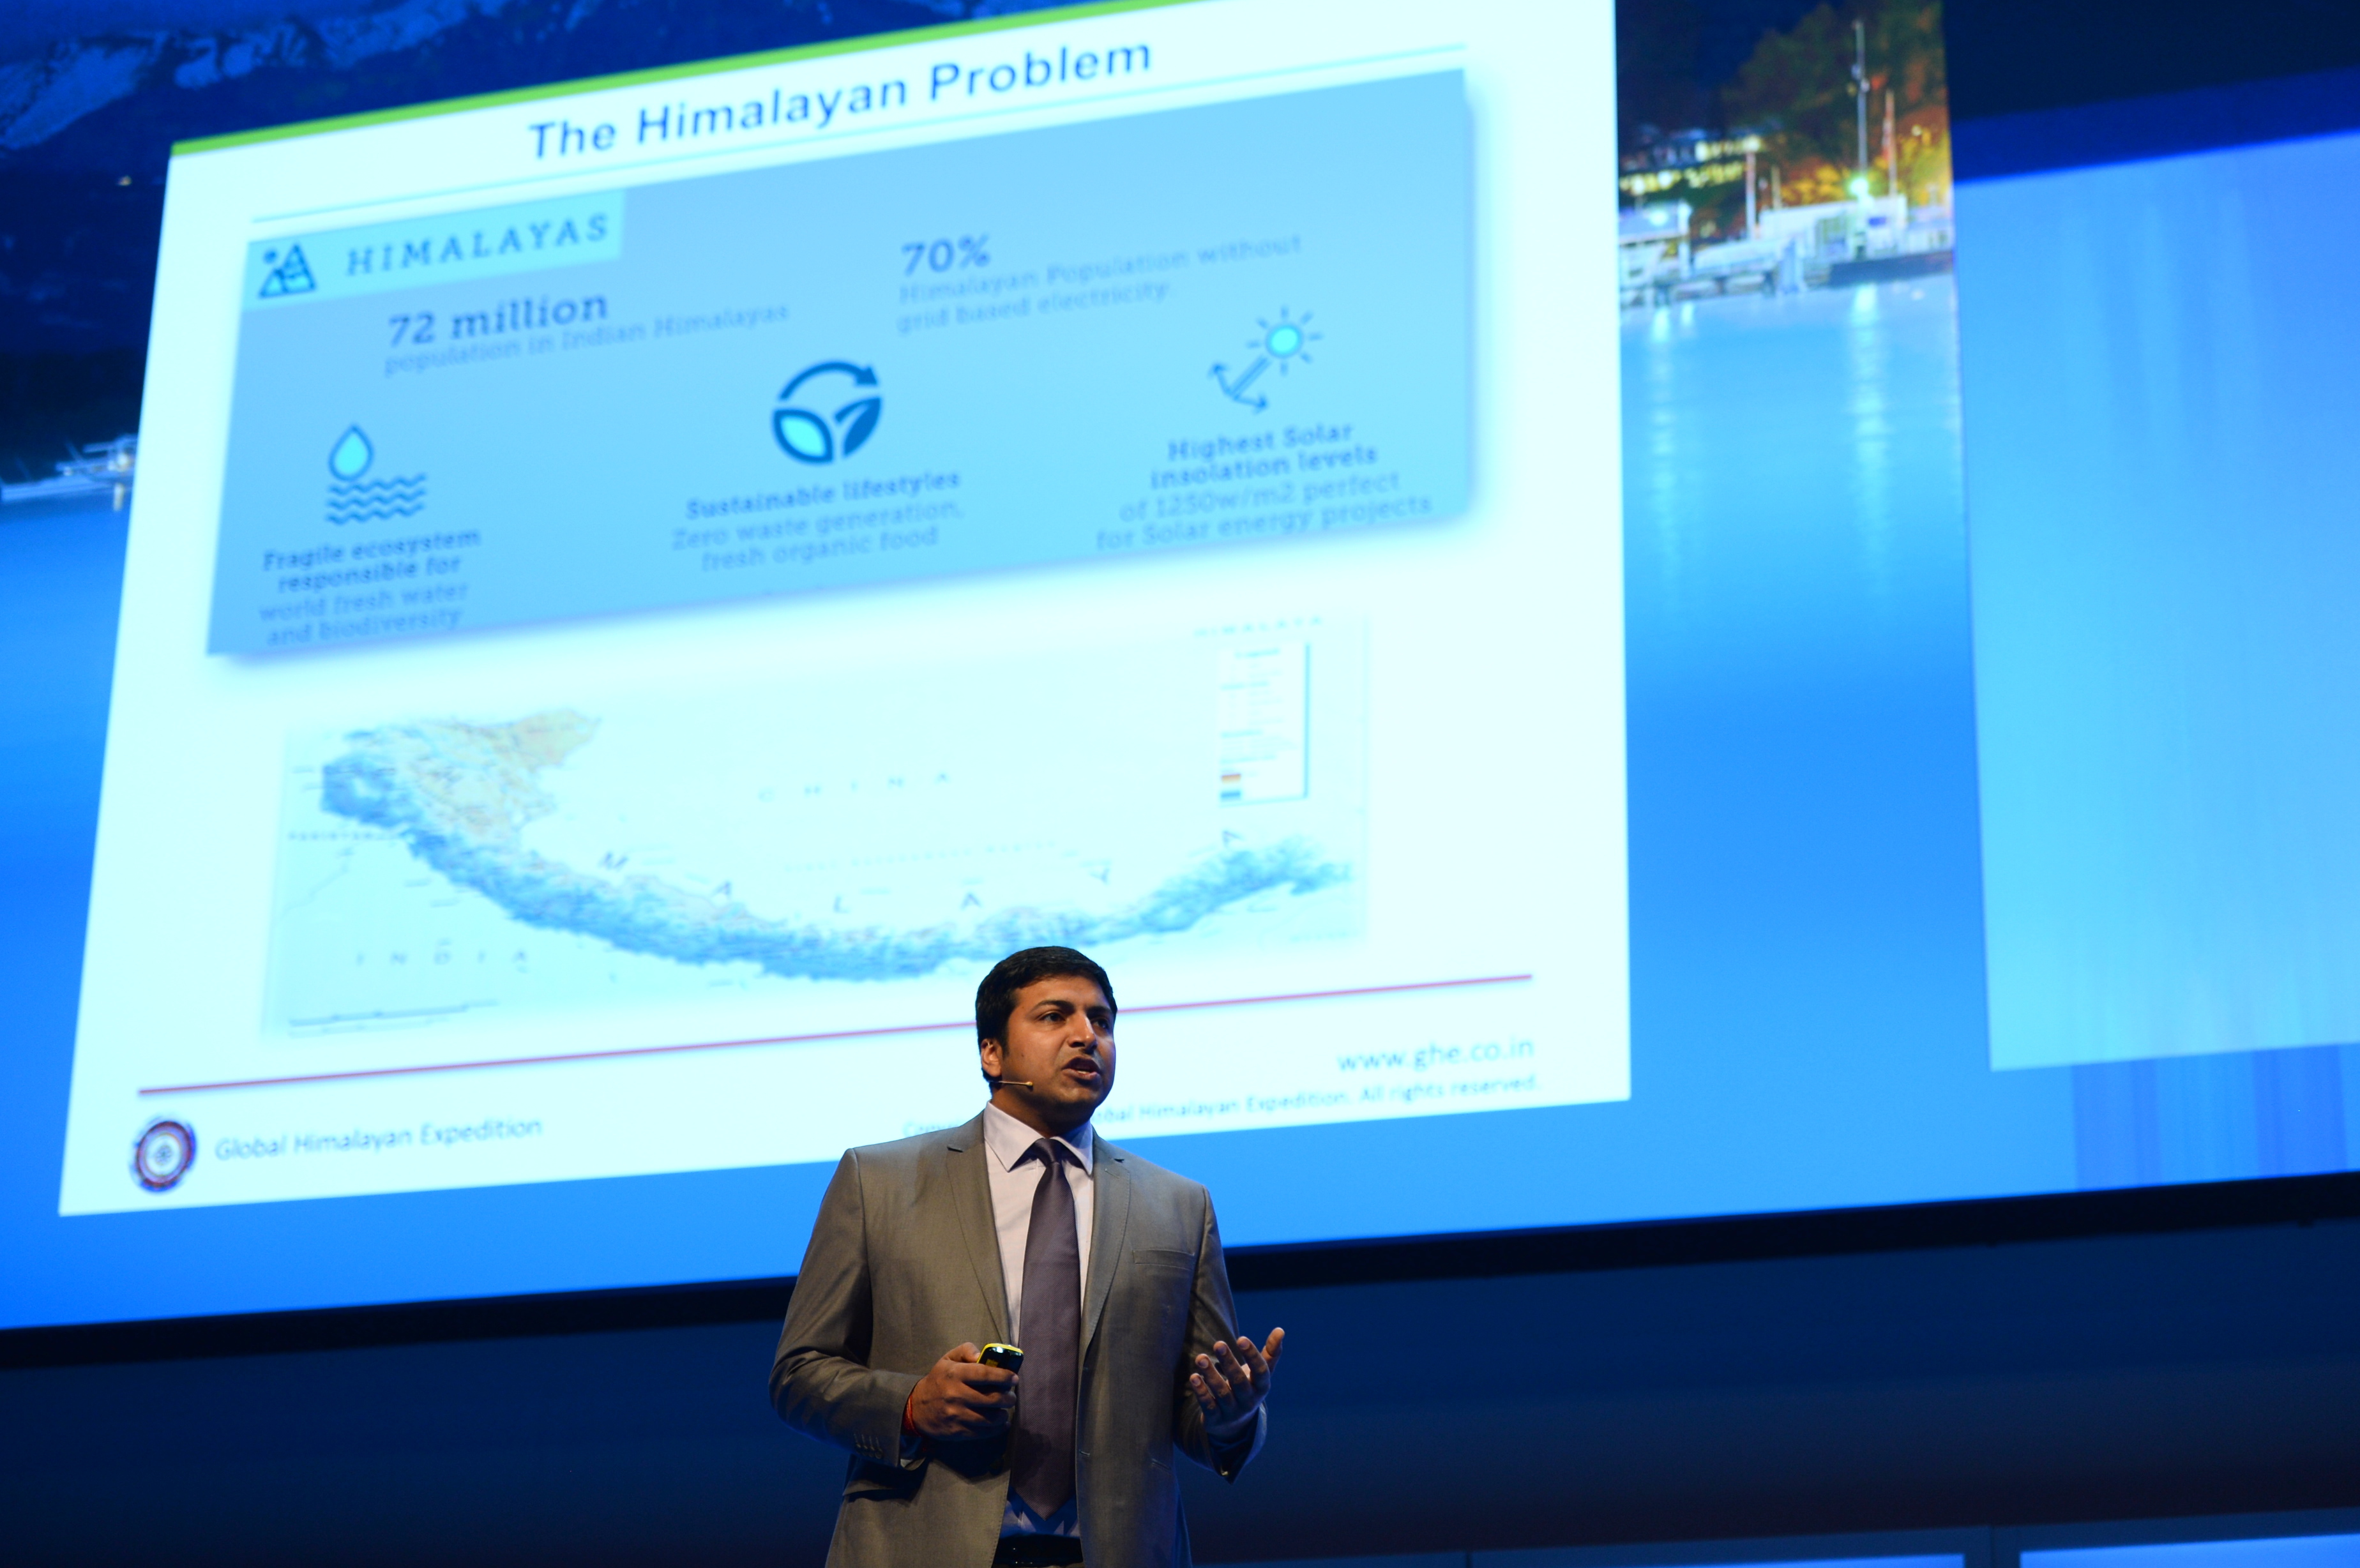 Paras Loomba, founder of Global Himalayan Expedition, presents at the World Tourism Forum Lucerne